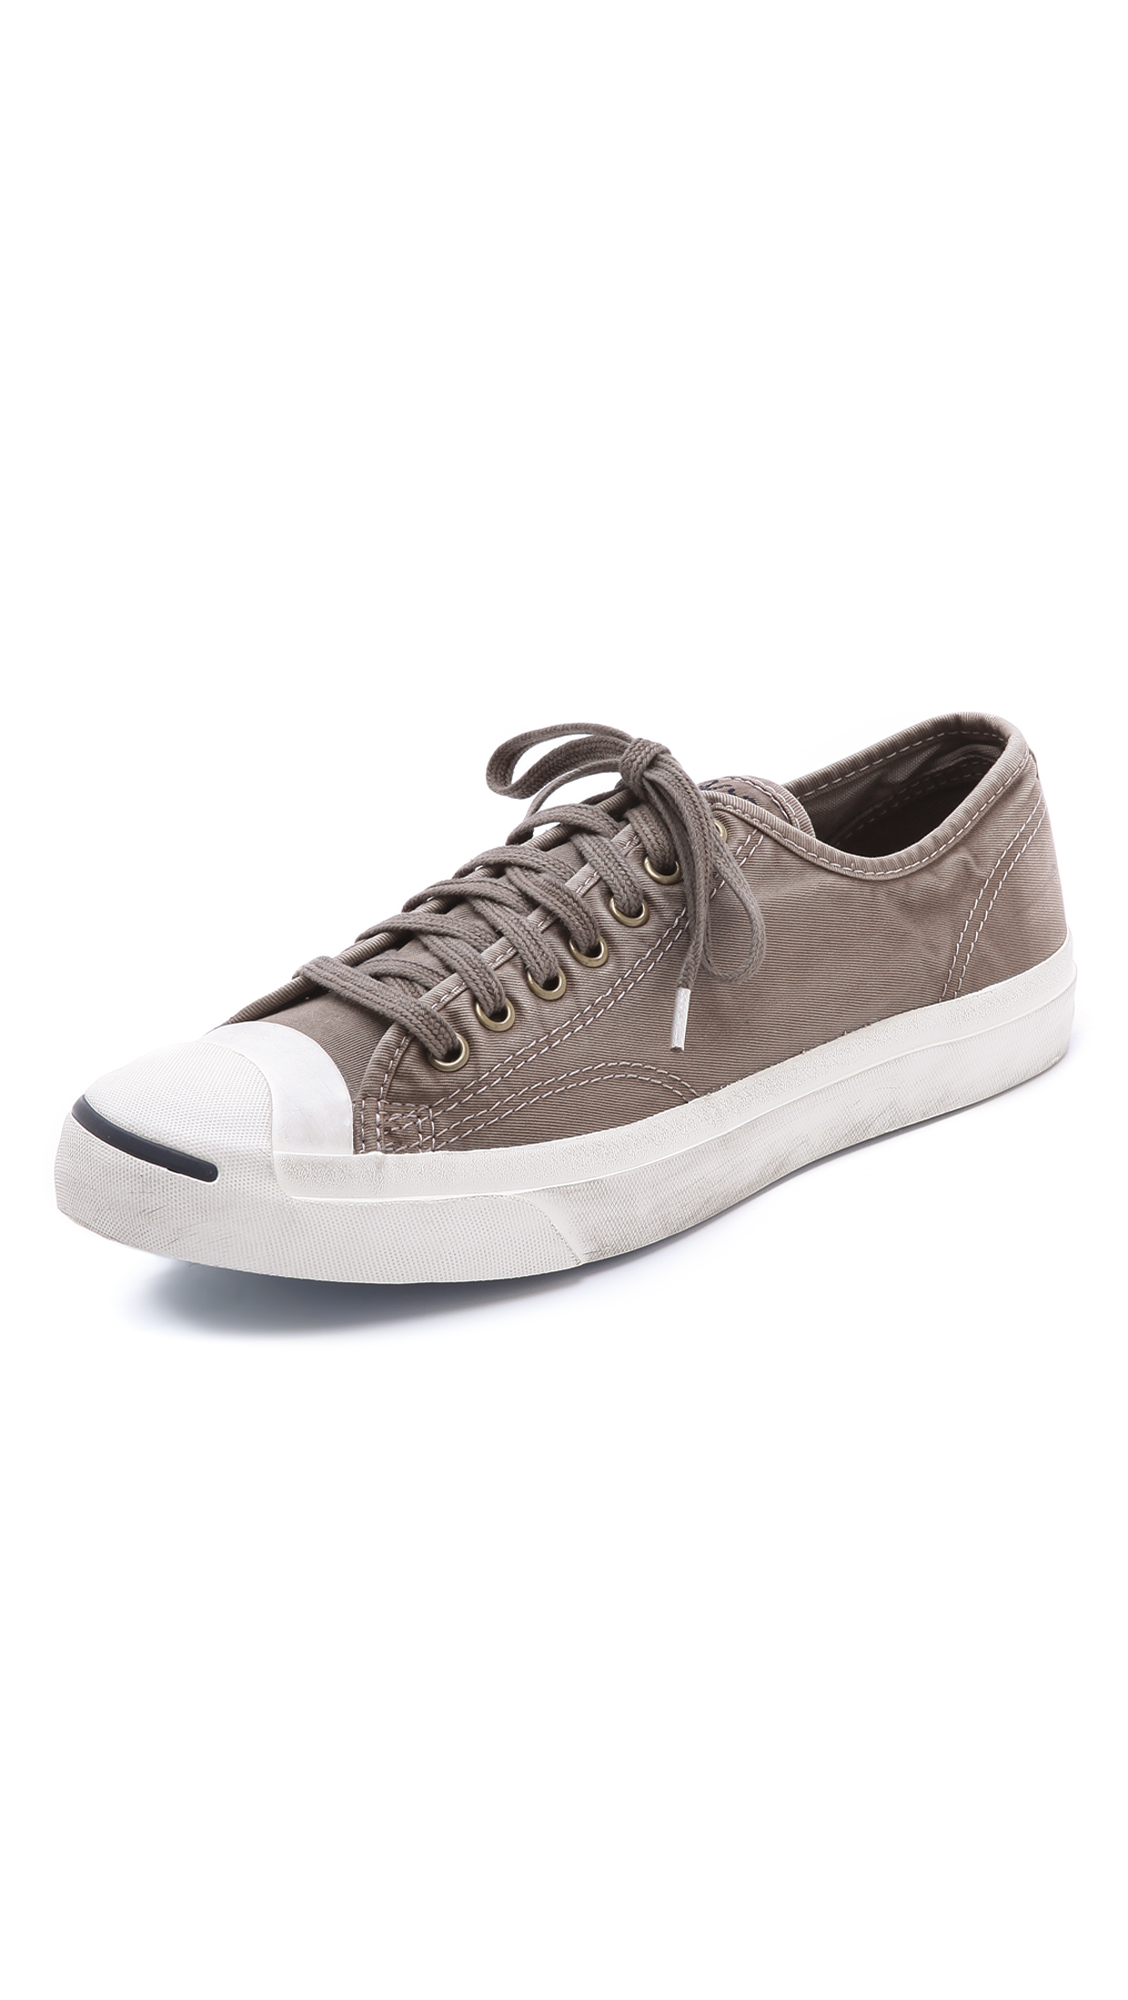 Lyst - Converse Jack Purcell Washed Canvas Sneakers in Gray for Men